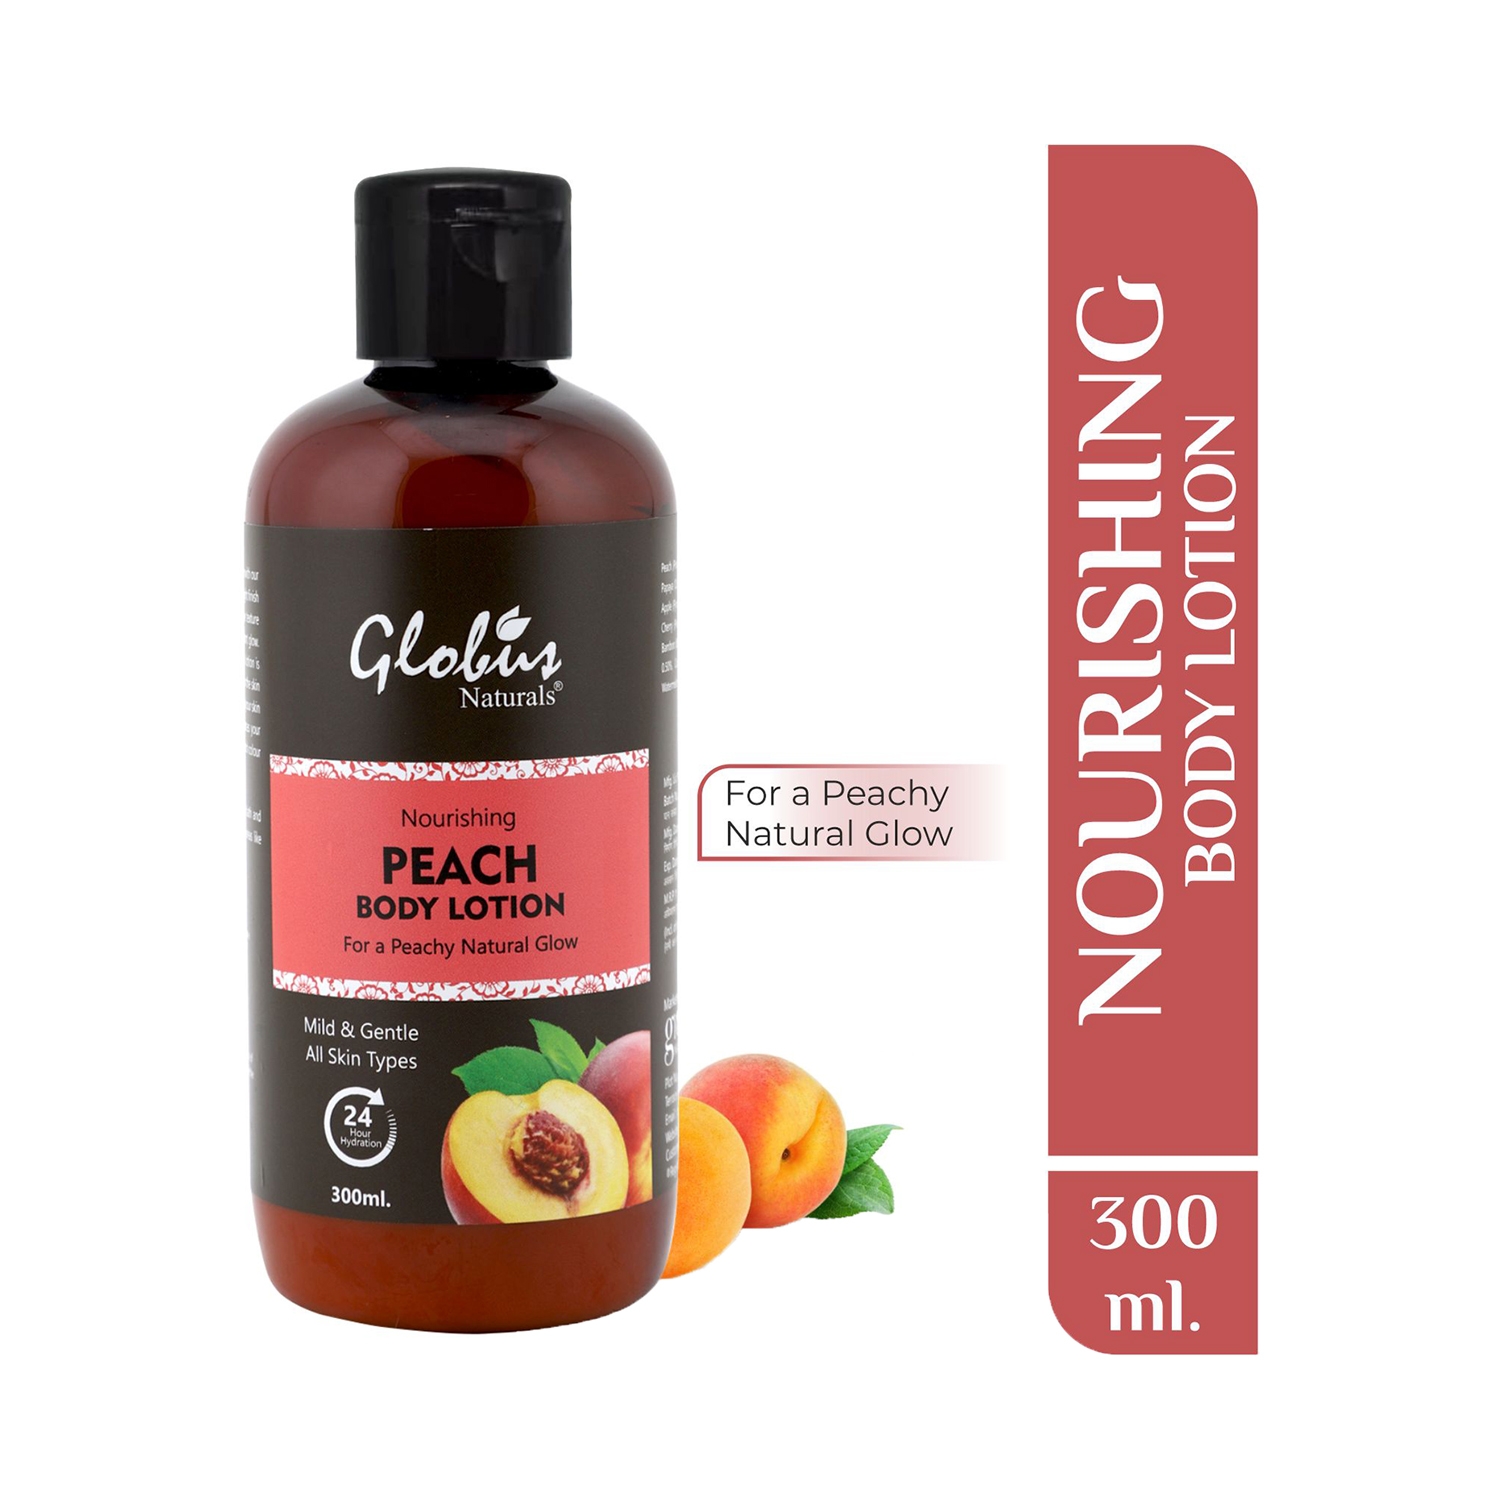 Globus Naturals | Globus Naturals Nourishing Peach Body Lotion Enriched With Aloe Vera, Plum For Natural Glow (300ml)